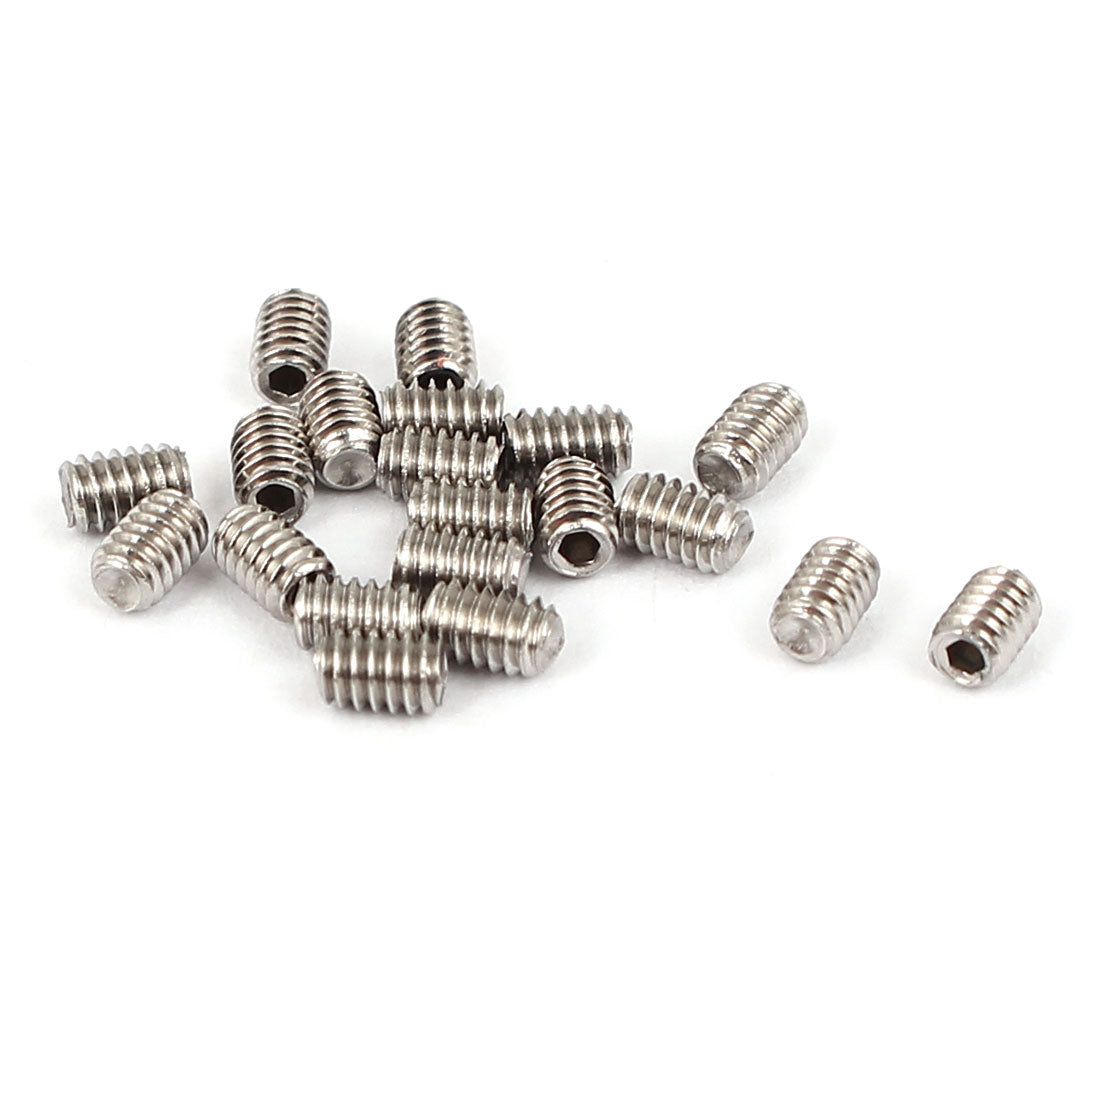 uxcell Uxcell M2x3mm Cup Point Hex Socket Grub Set Screws 20pcs for Gear